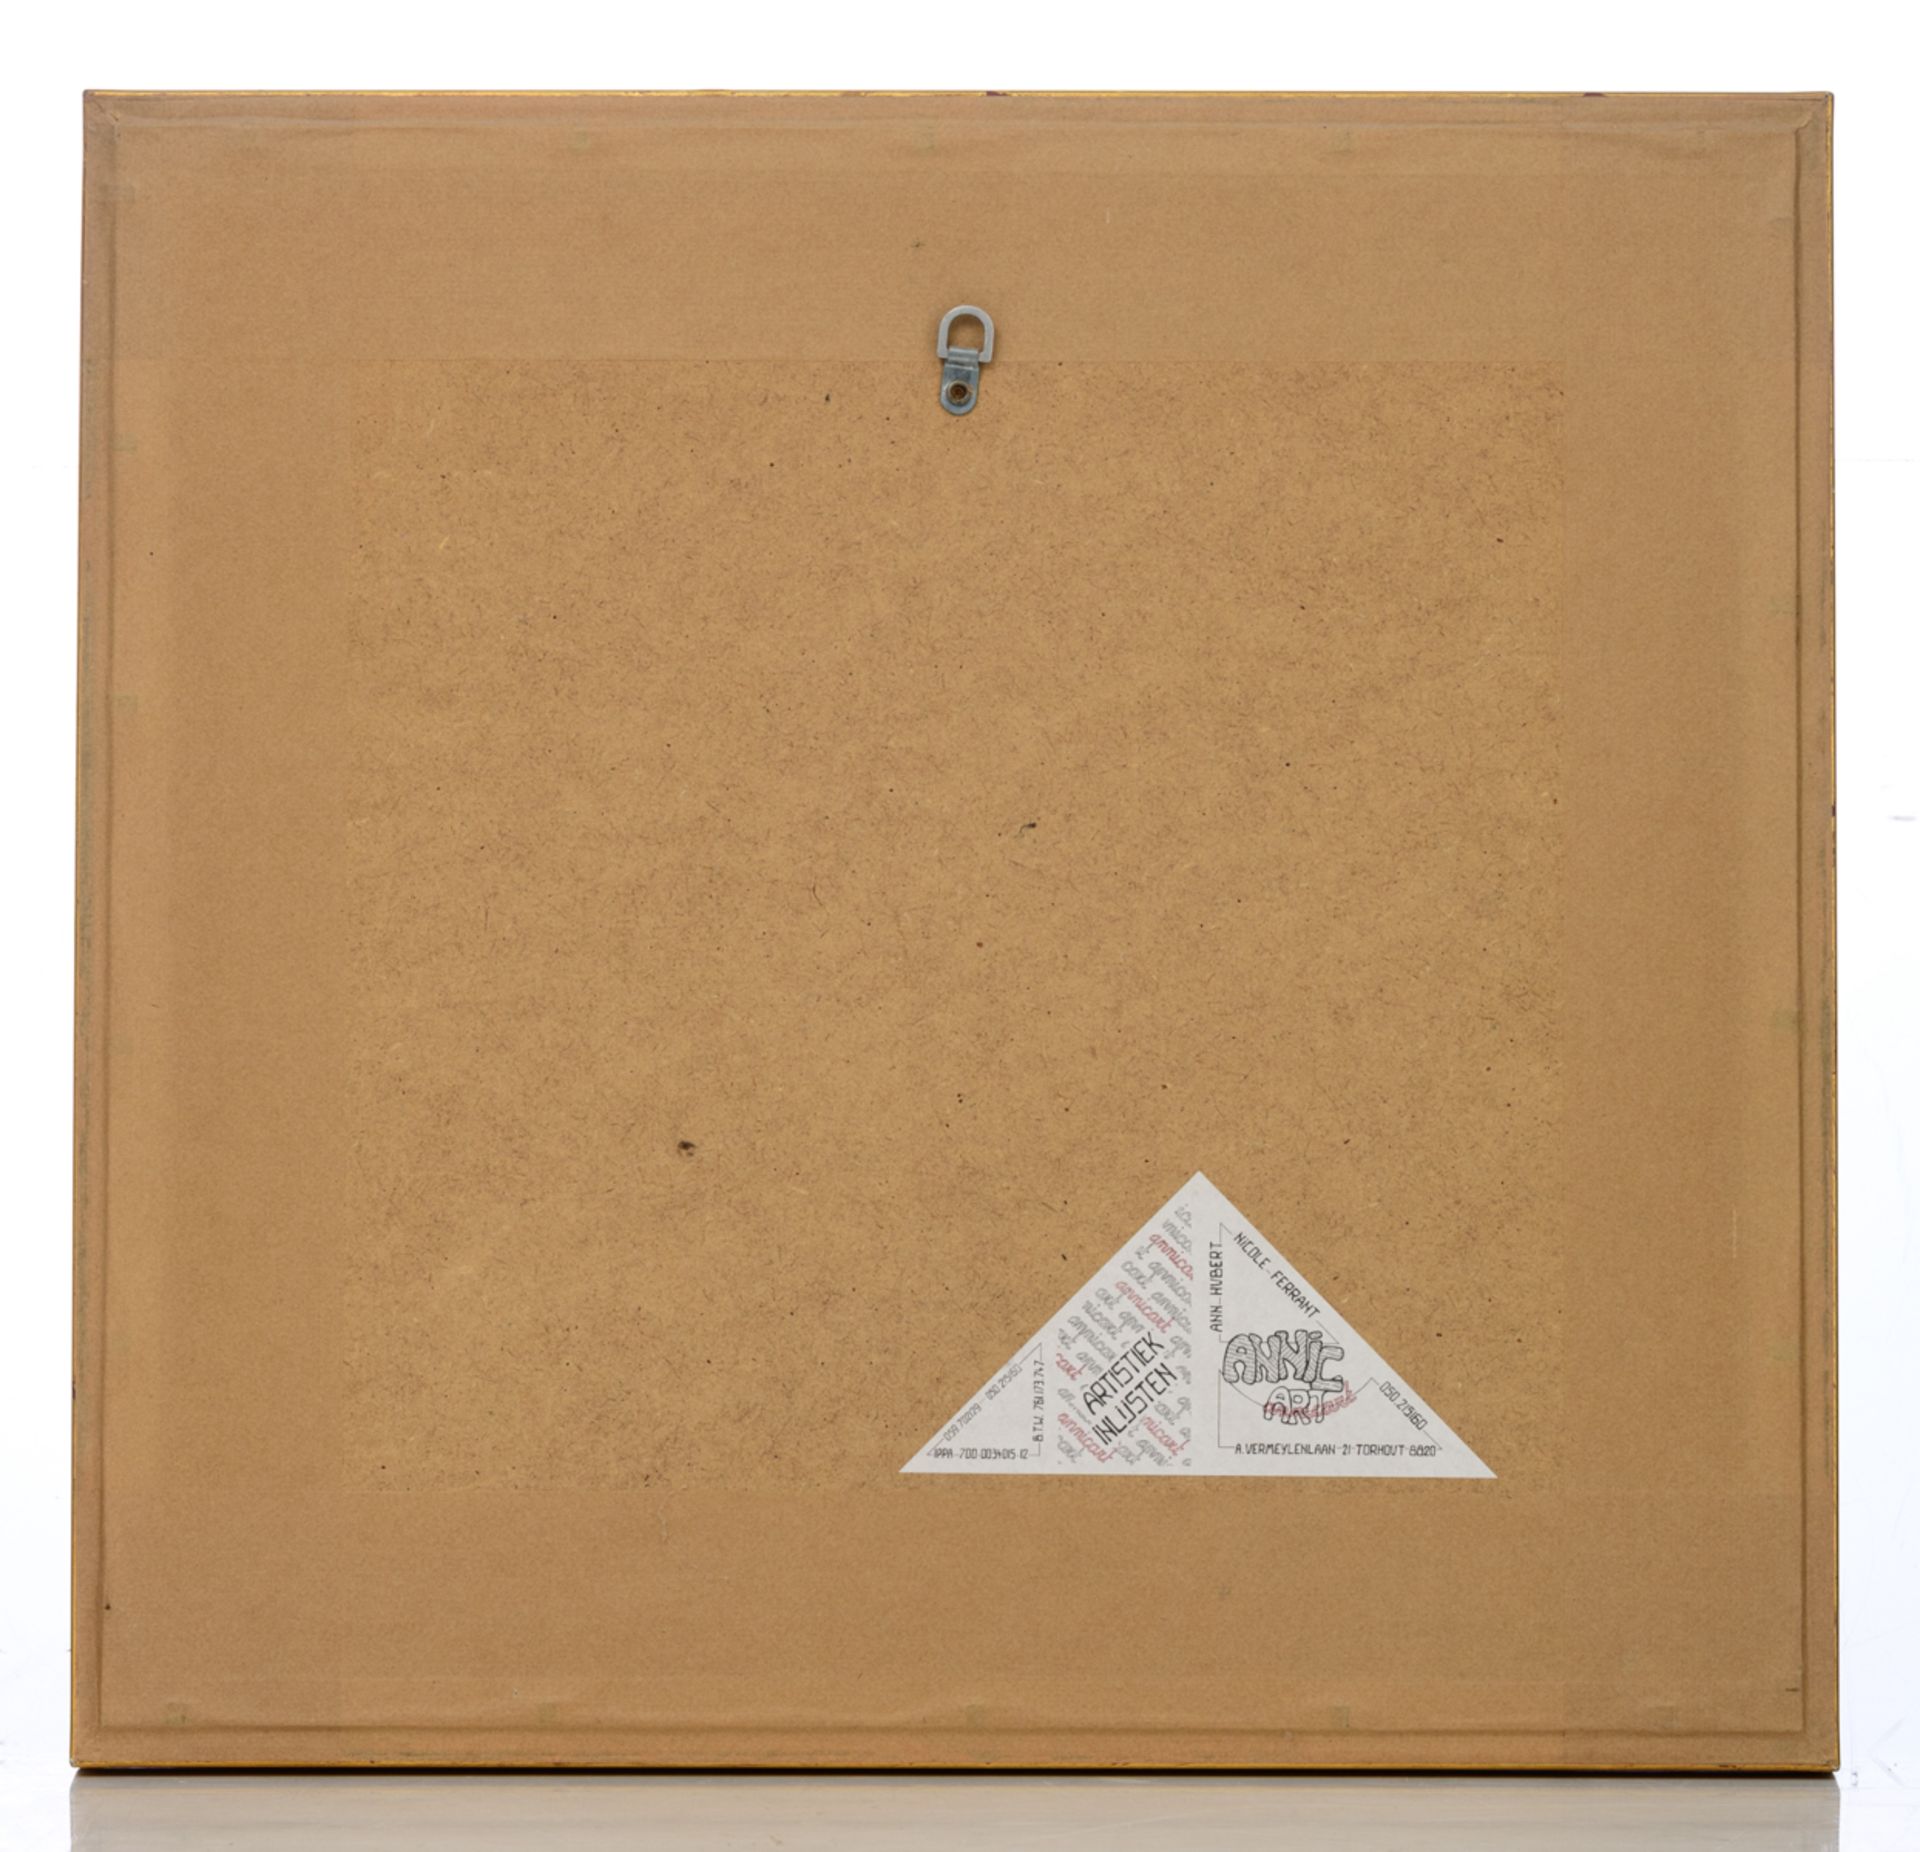 Van Hecke W., four untitled works, dated 1957, 1963, 1963 and 1964, mixed media, 34 x 40 - 40 x 45 c - Image 8 of 14